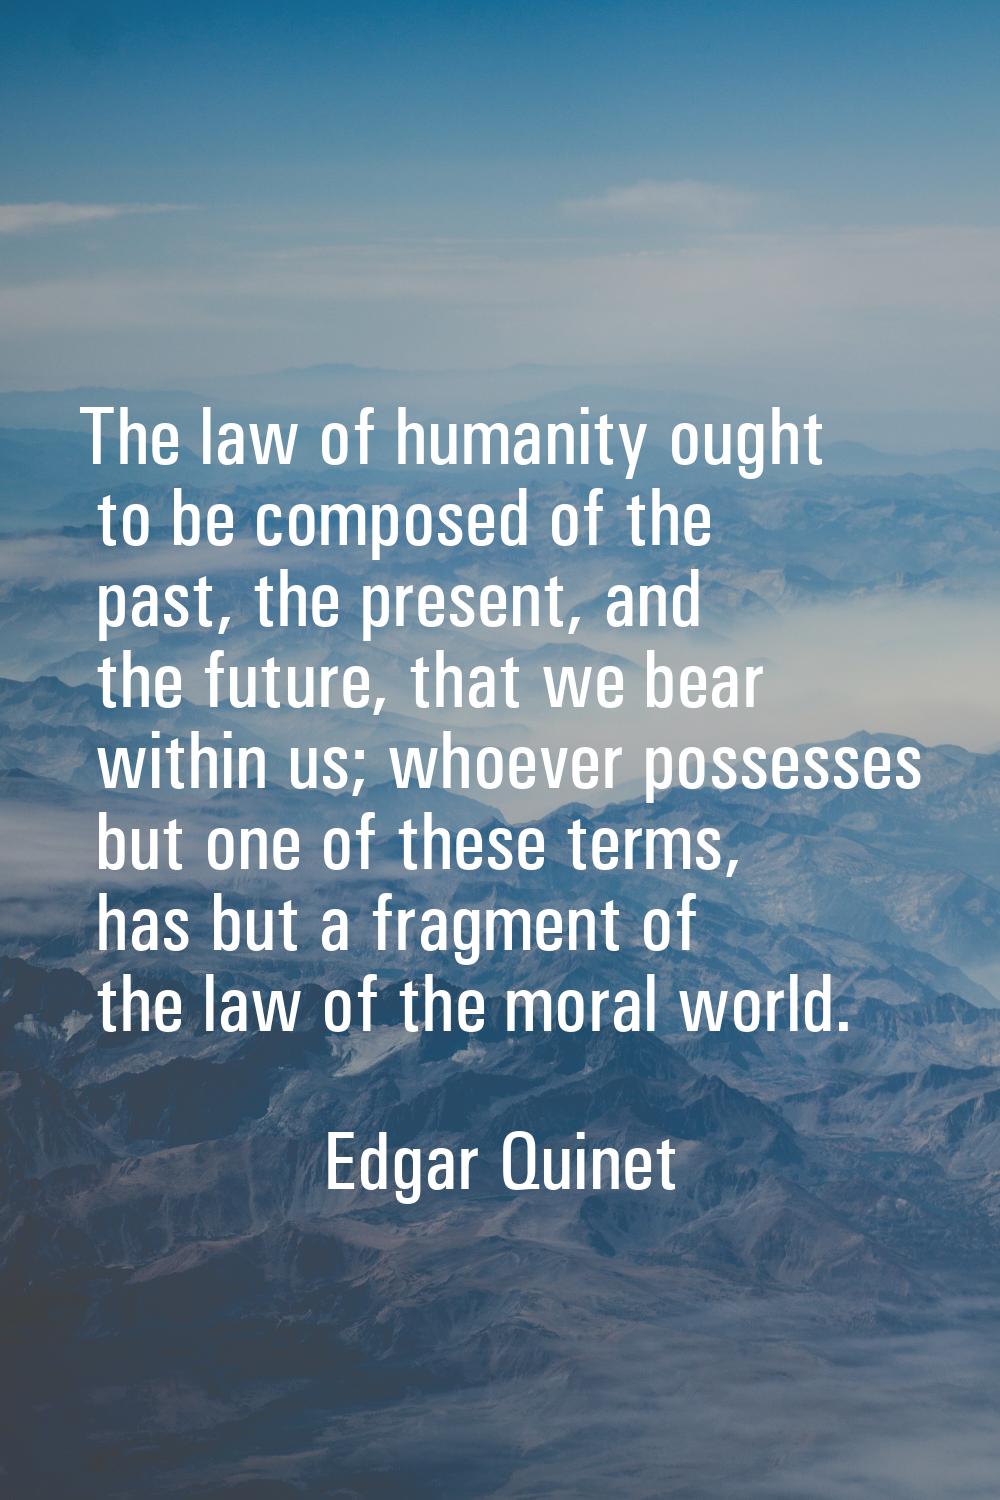 The law of humanity ought to be composed of the past, the present, and the future, that we bear wit